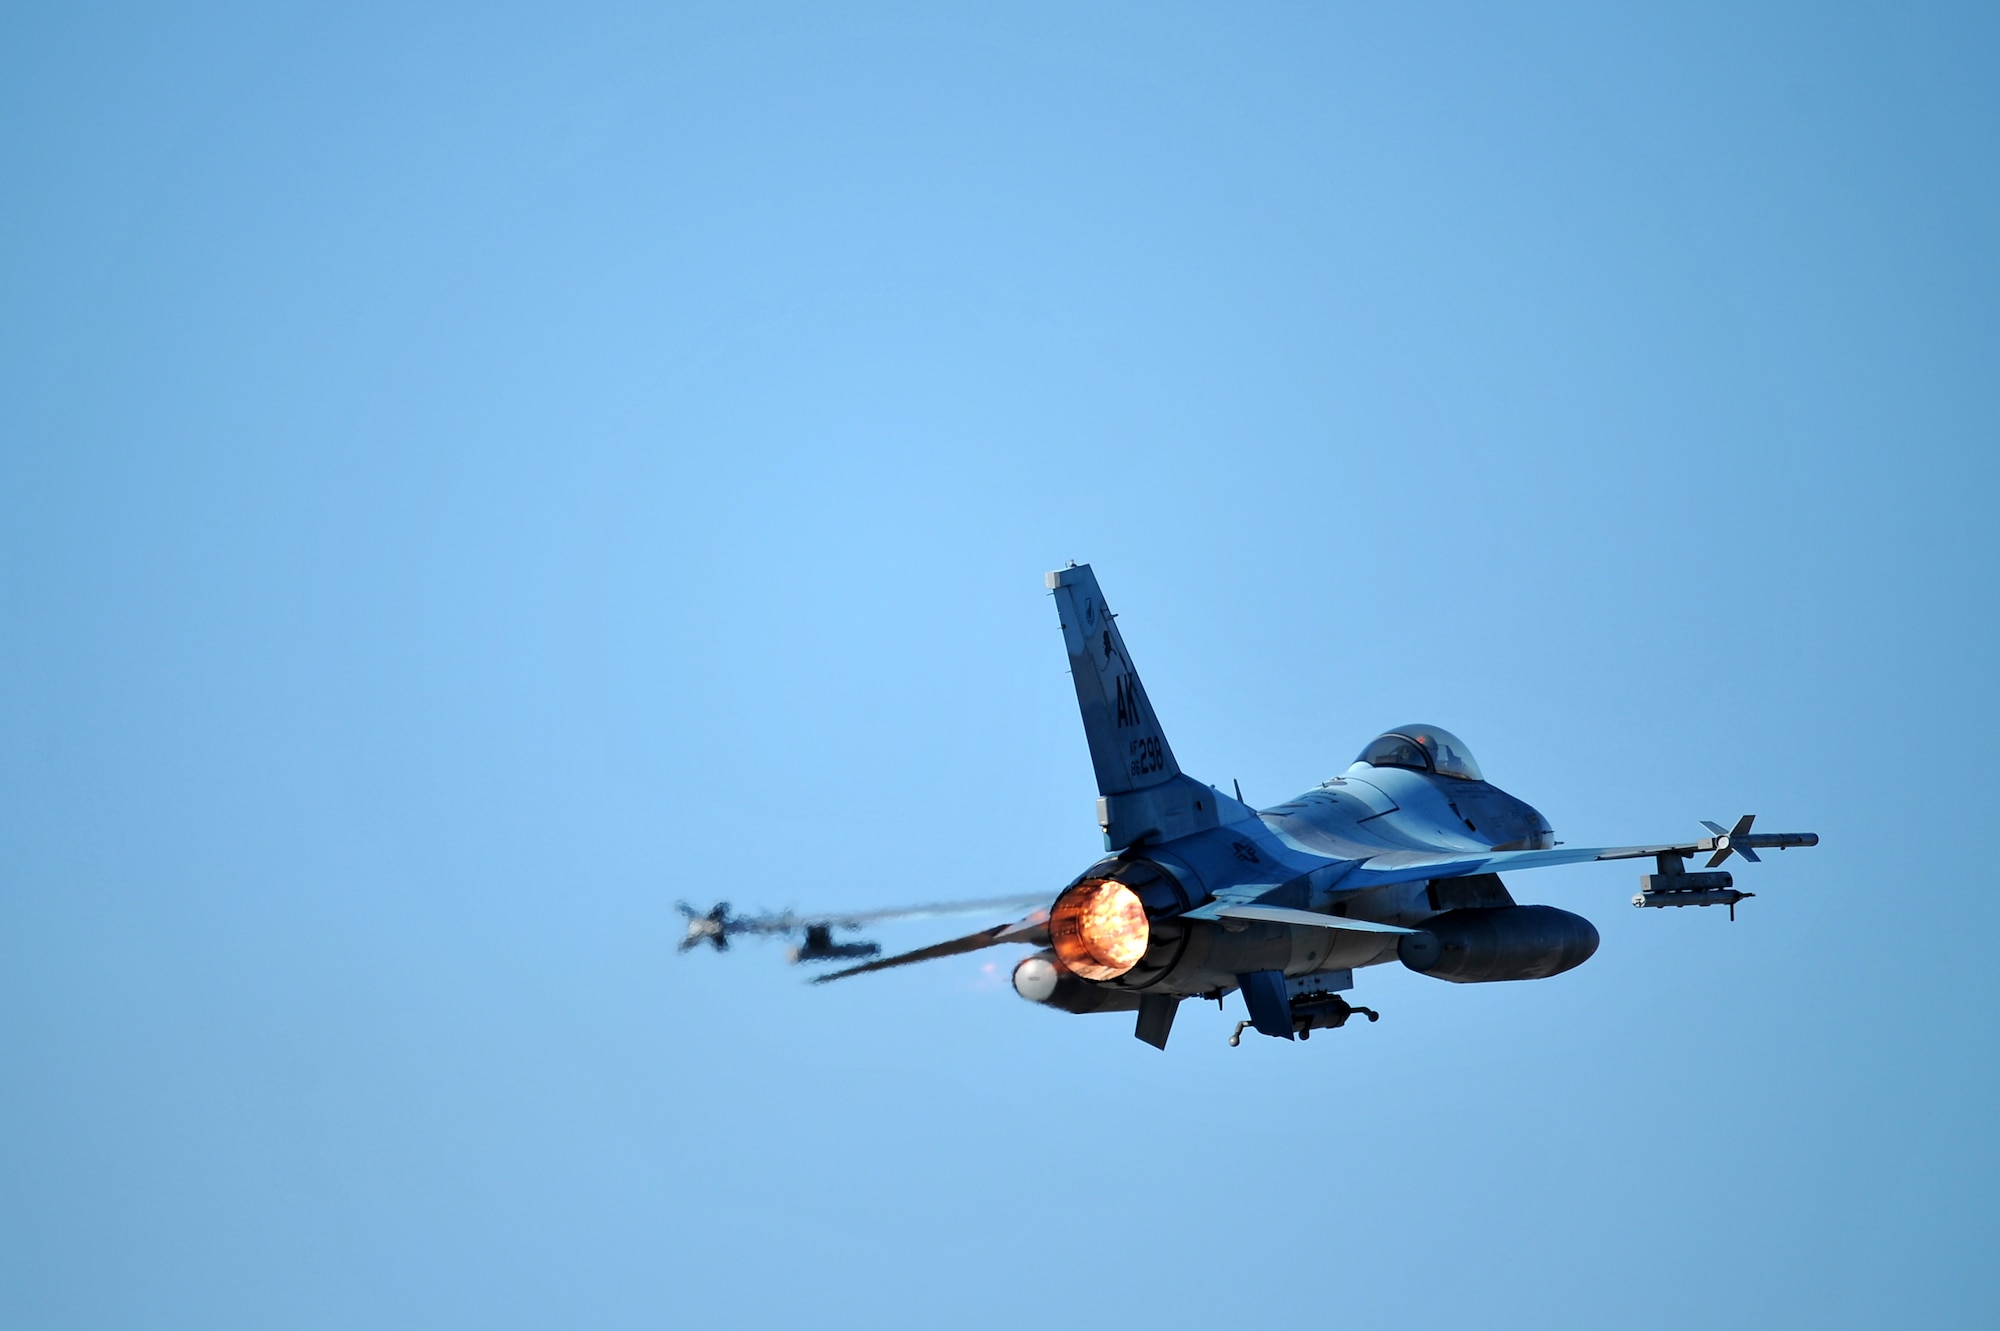 An F-16 Fighting Falcon takes off Sept. 25, 2014, during Distant Frontier at Eielson Air Force Base, Alaska. The F-16 is assigned to the 18th Aggressor Squadron. Aggressor pilots are trained to act as opposing forces in Red Flag-Alaska, to prepare U.S. and allied forces for real-world aerial combat. (U.S. Air Force photo/Staff Sgt. Jim Araos)